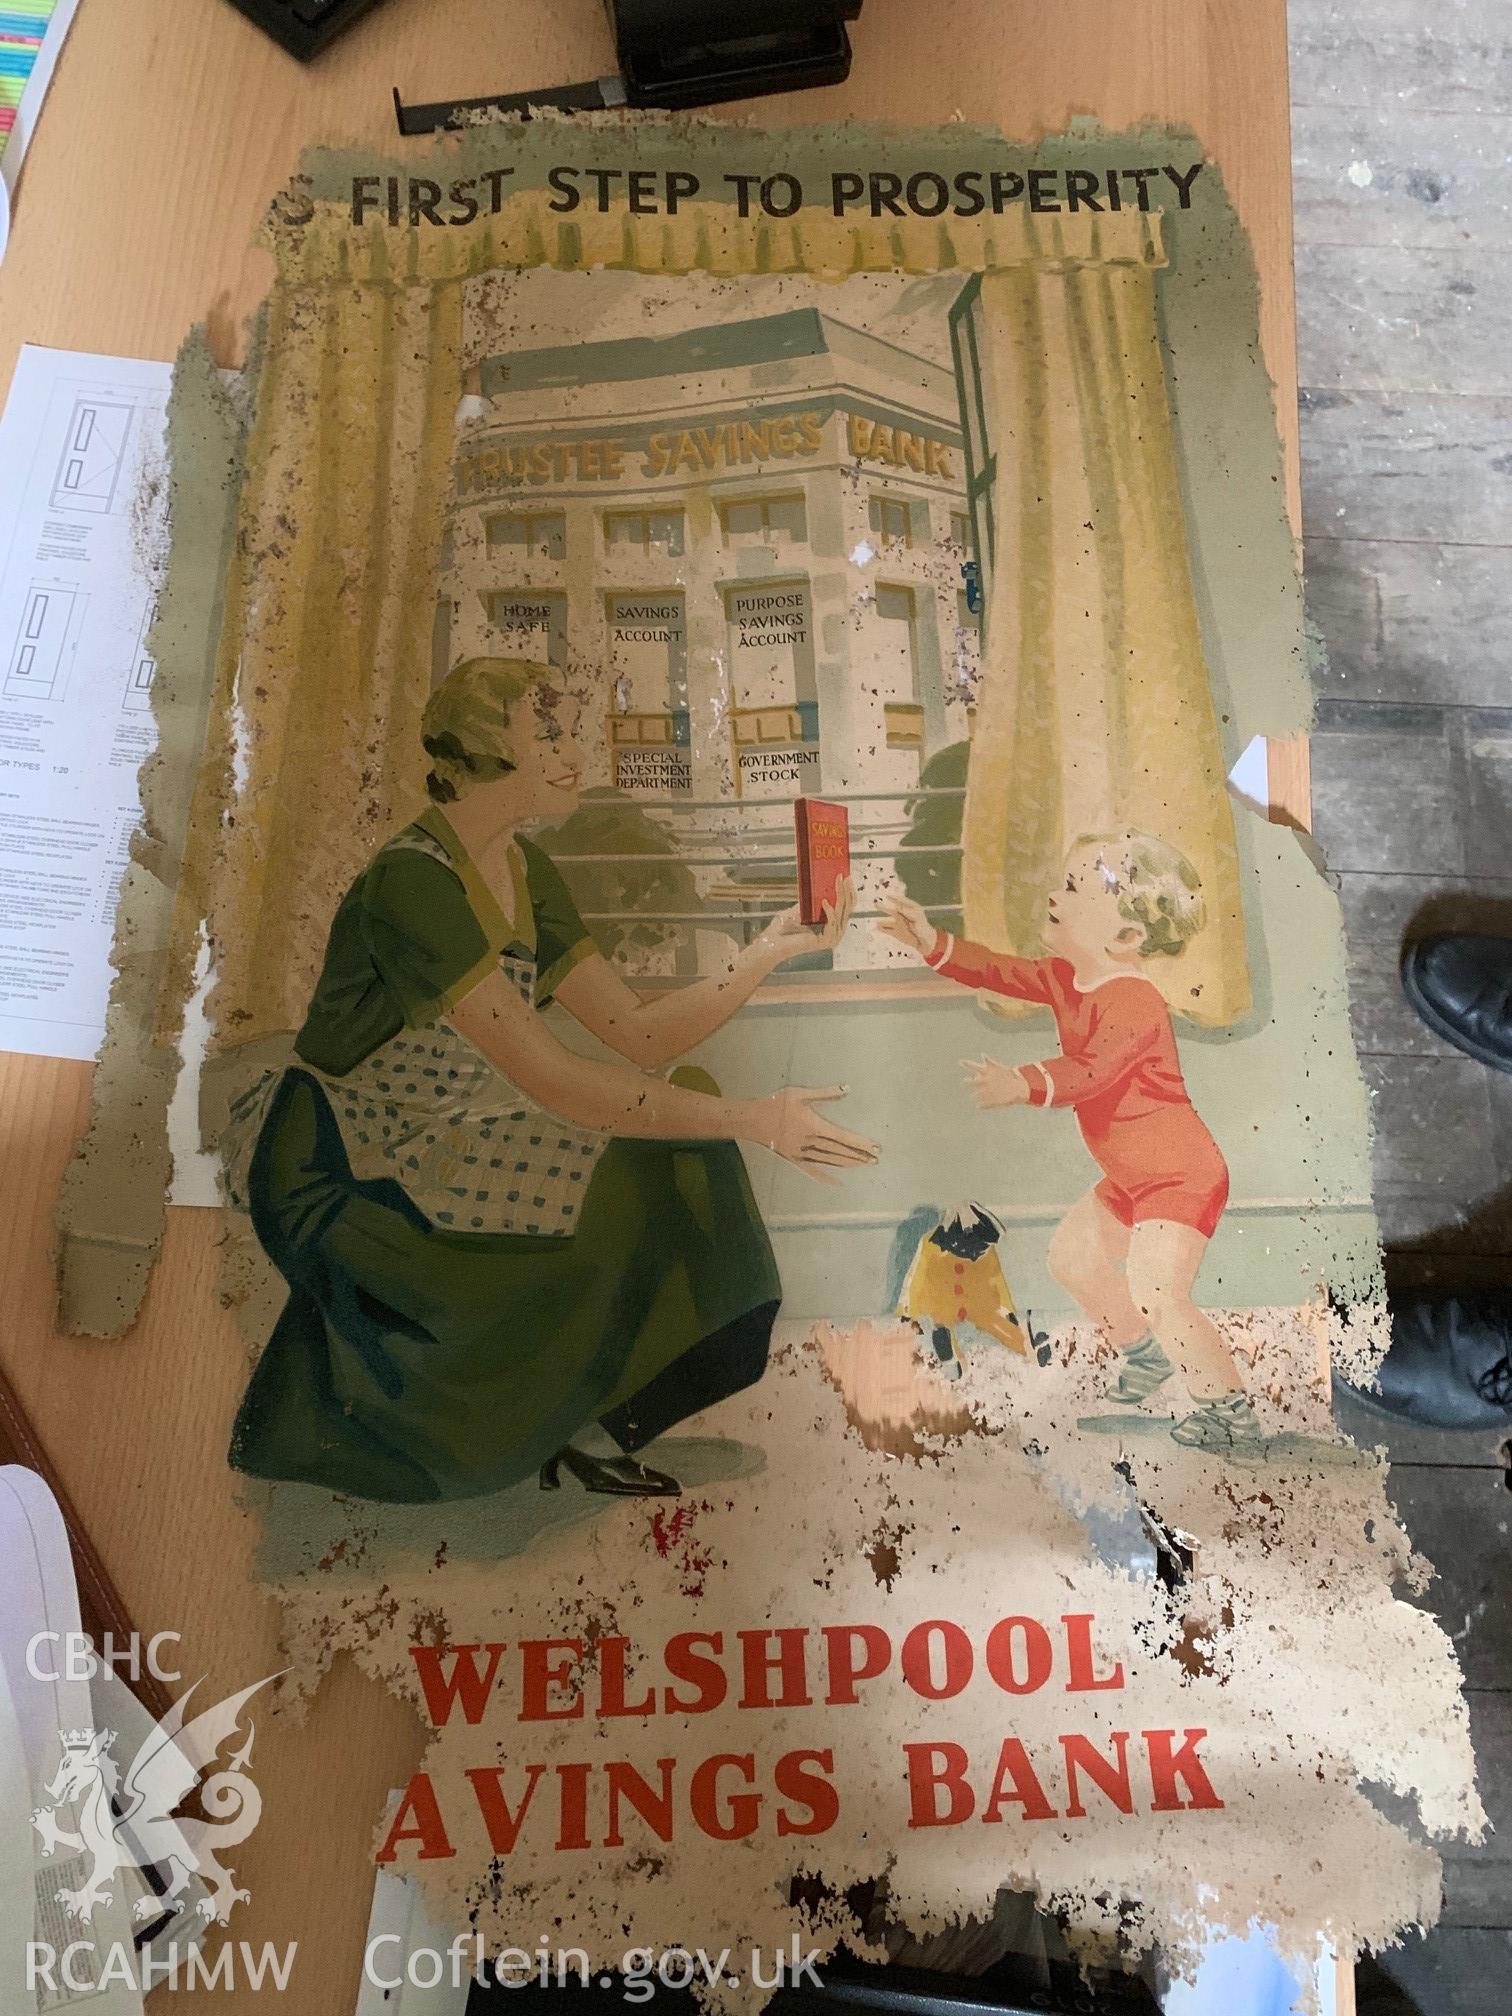 Digital colour photograph showing poster for Welshpool Savings Bank. Photographed as part of CPAT Project 2351: 2 Severn Street, Welshpool, Powys - Archaeological Watching Brief, 2019. Report no. 1663.